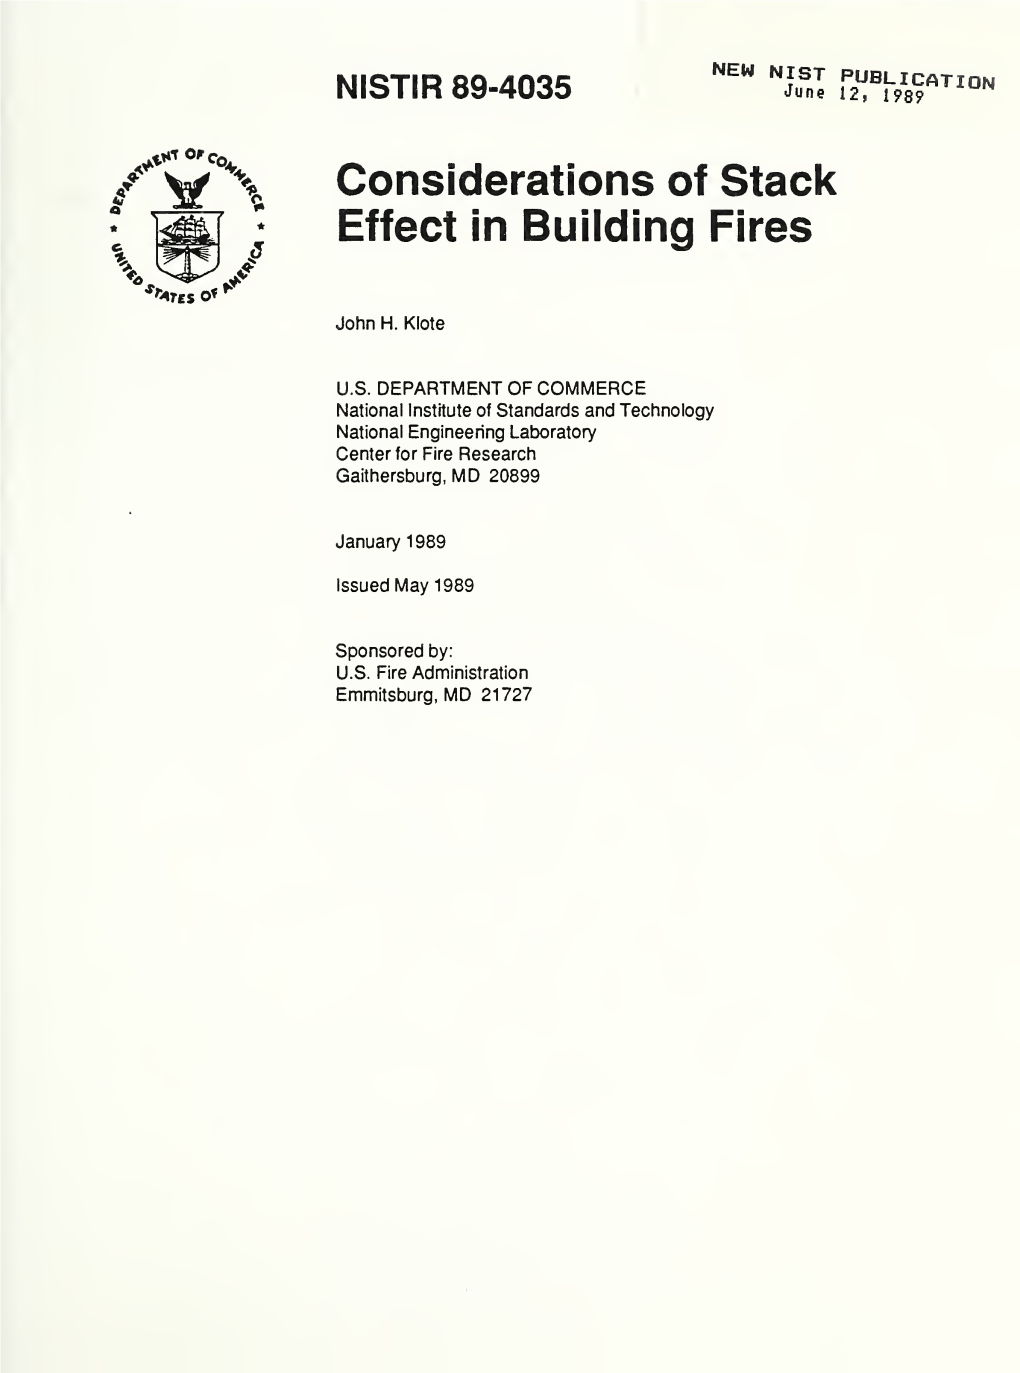 Considerations of Stack Effect in Building Fires